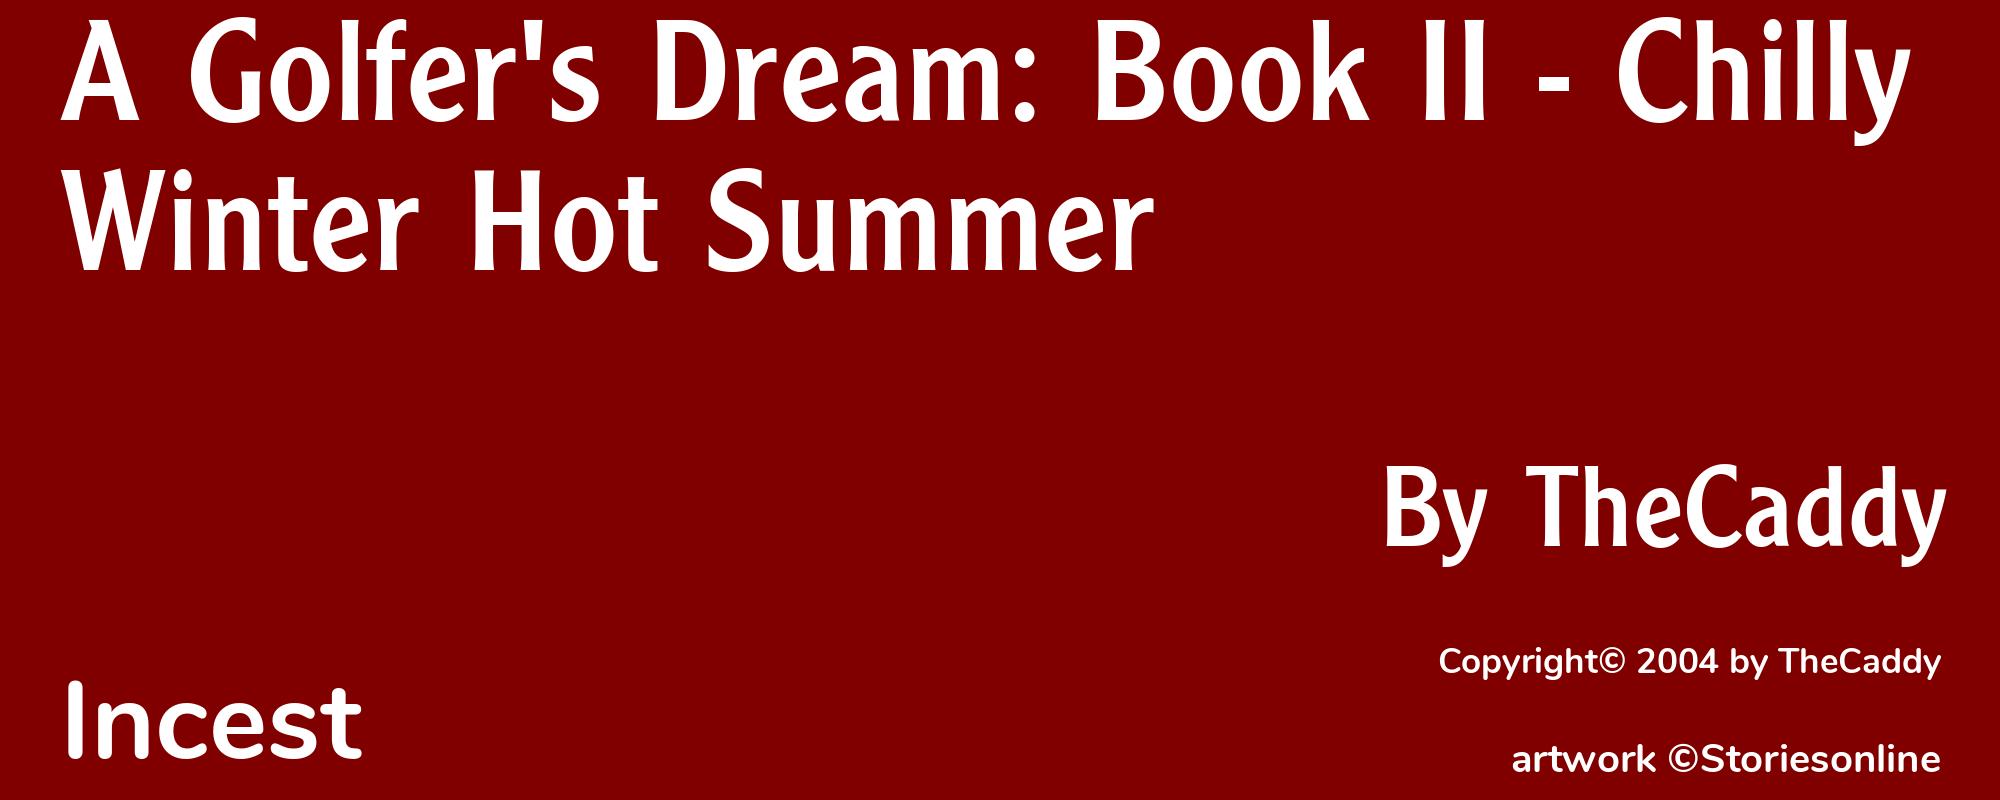 A Golfer's Dream: Book II - Chilly Winter Hot Summer - Cover